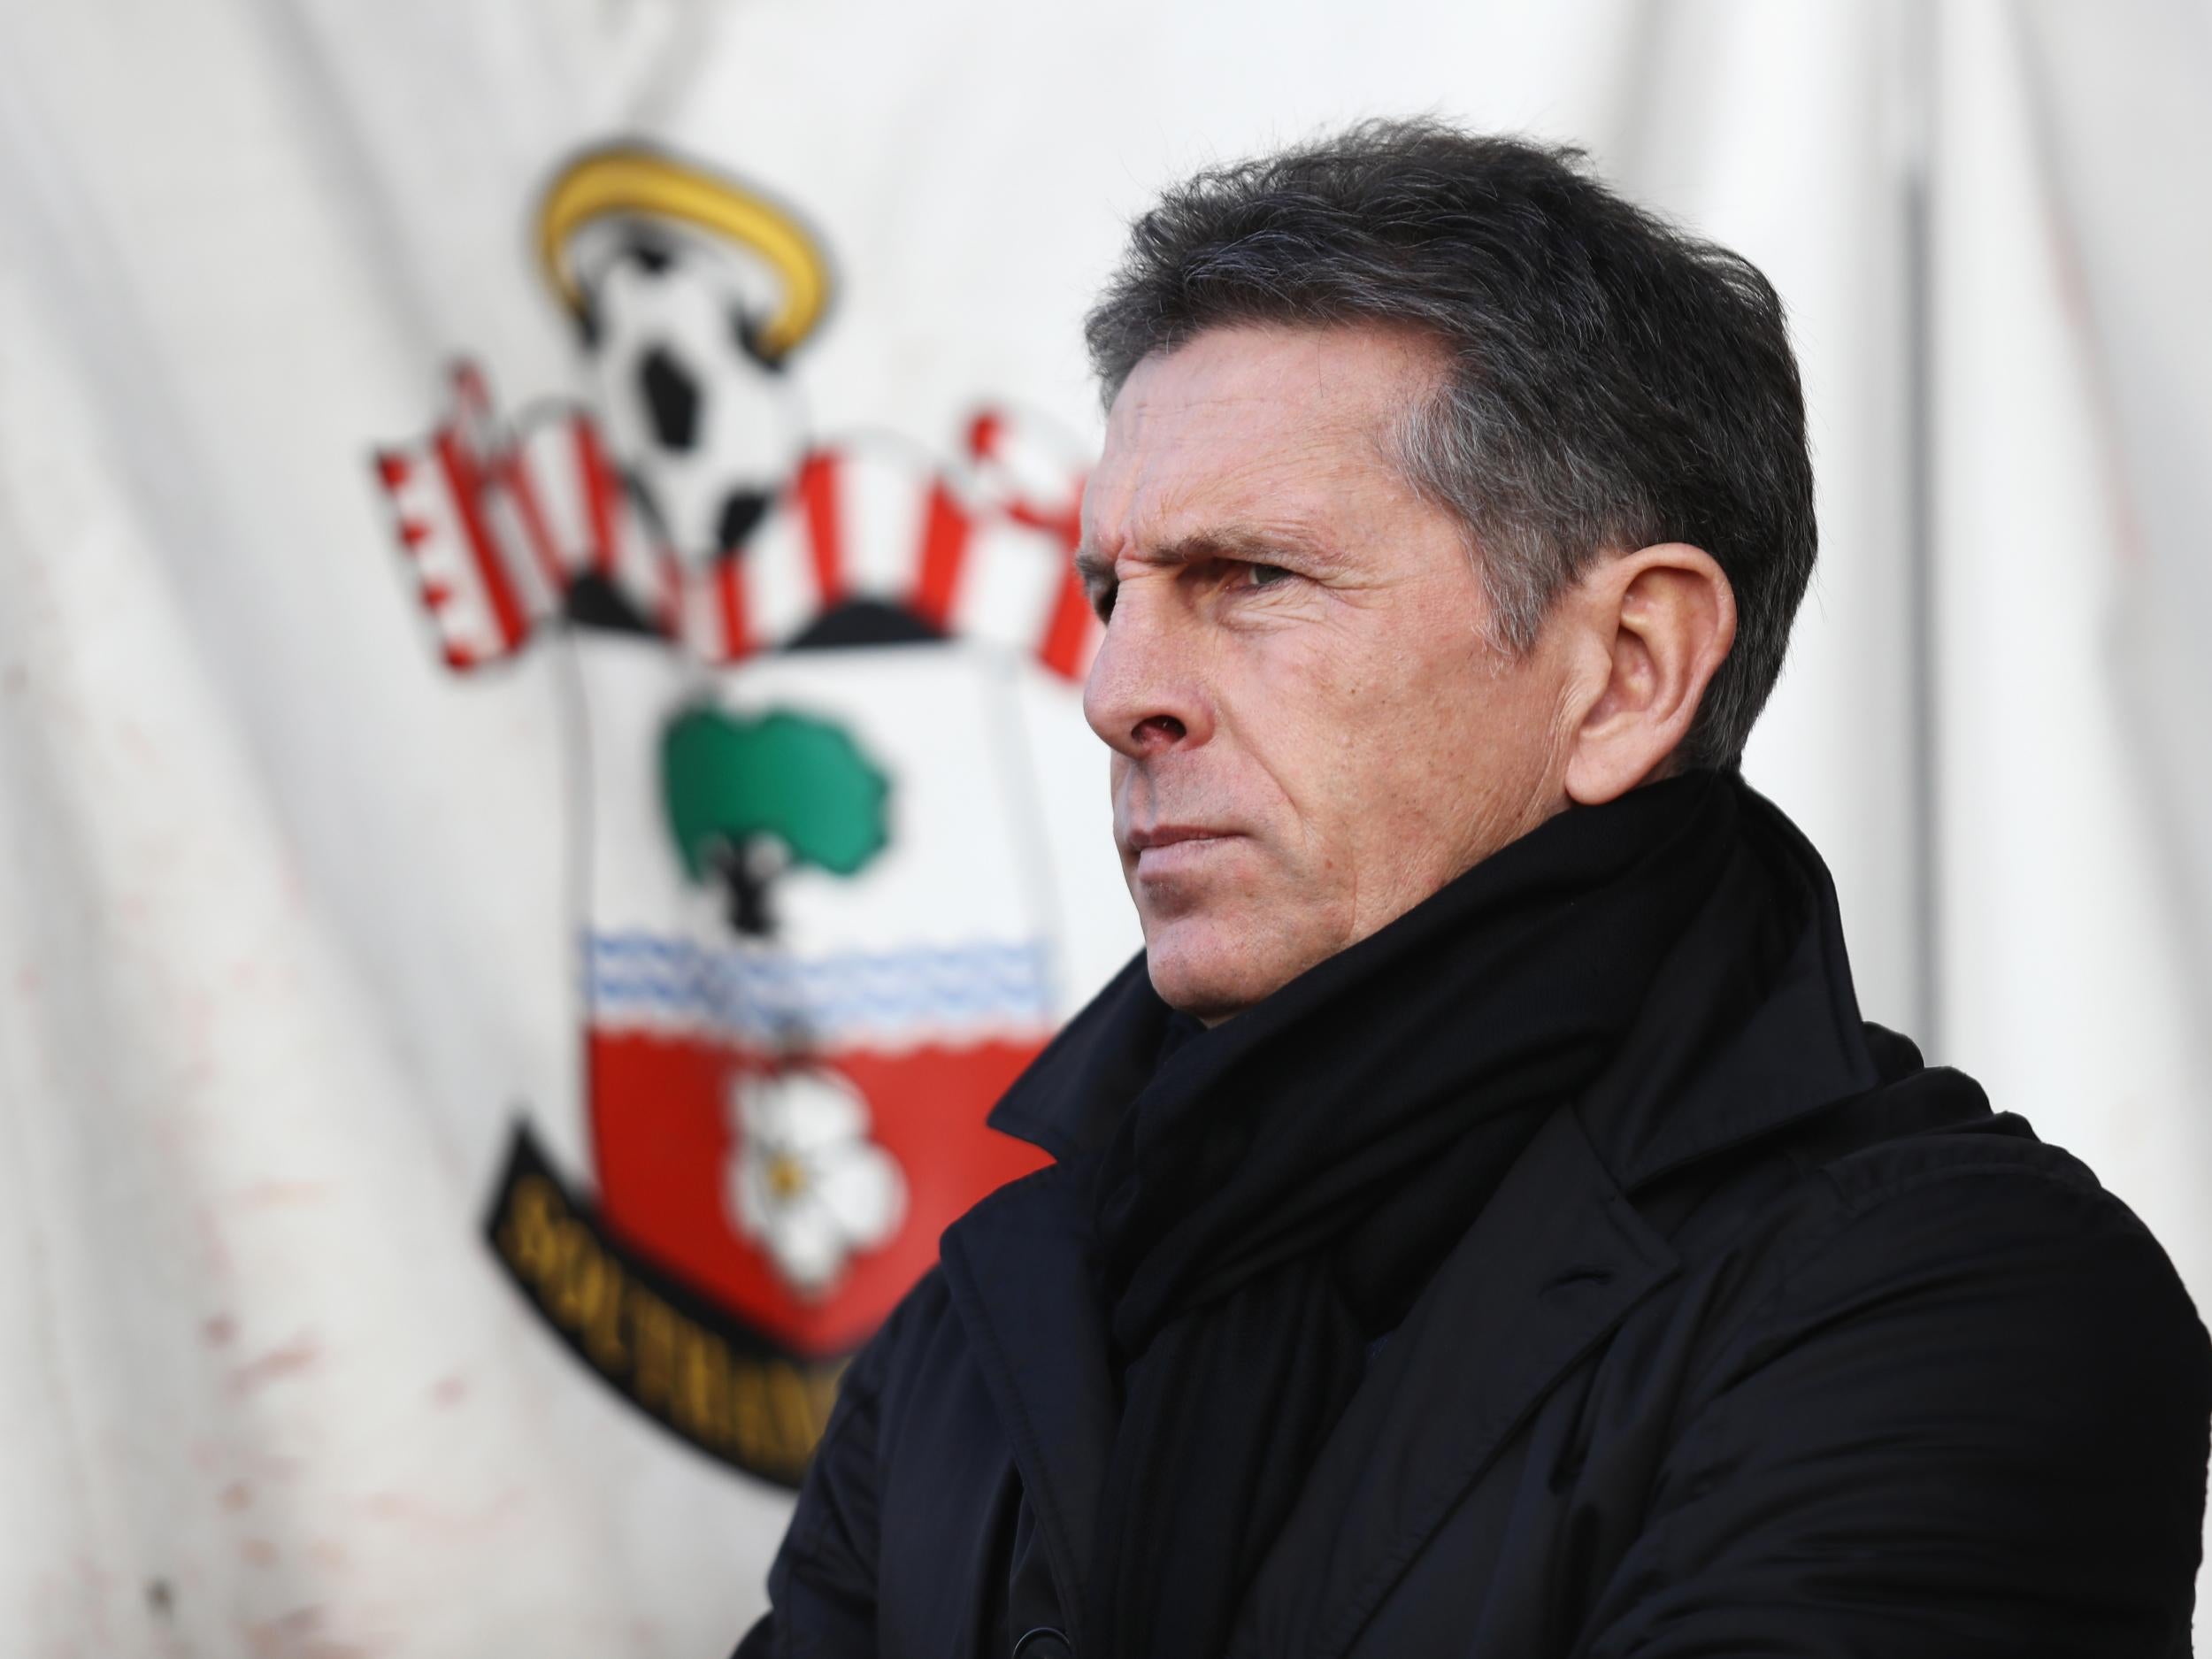 Puel was sacked after just one season in charge